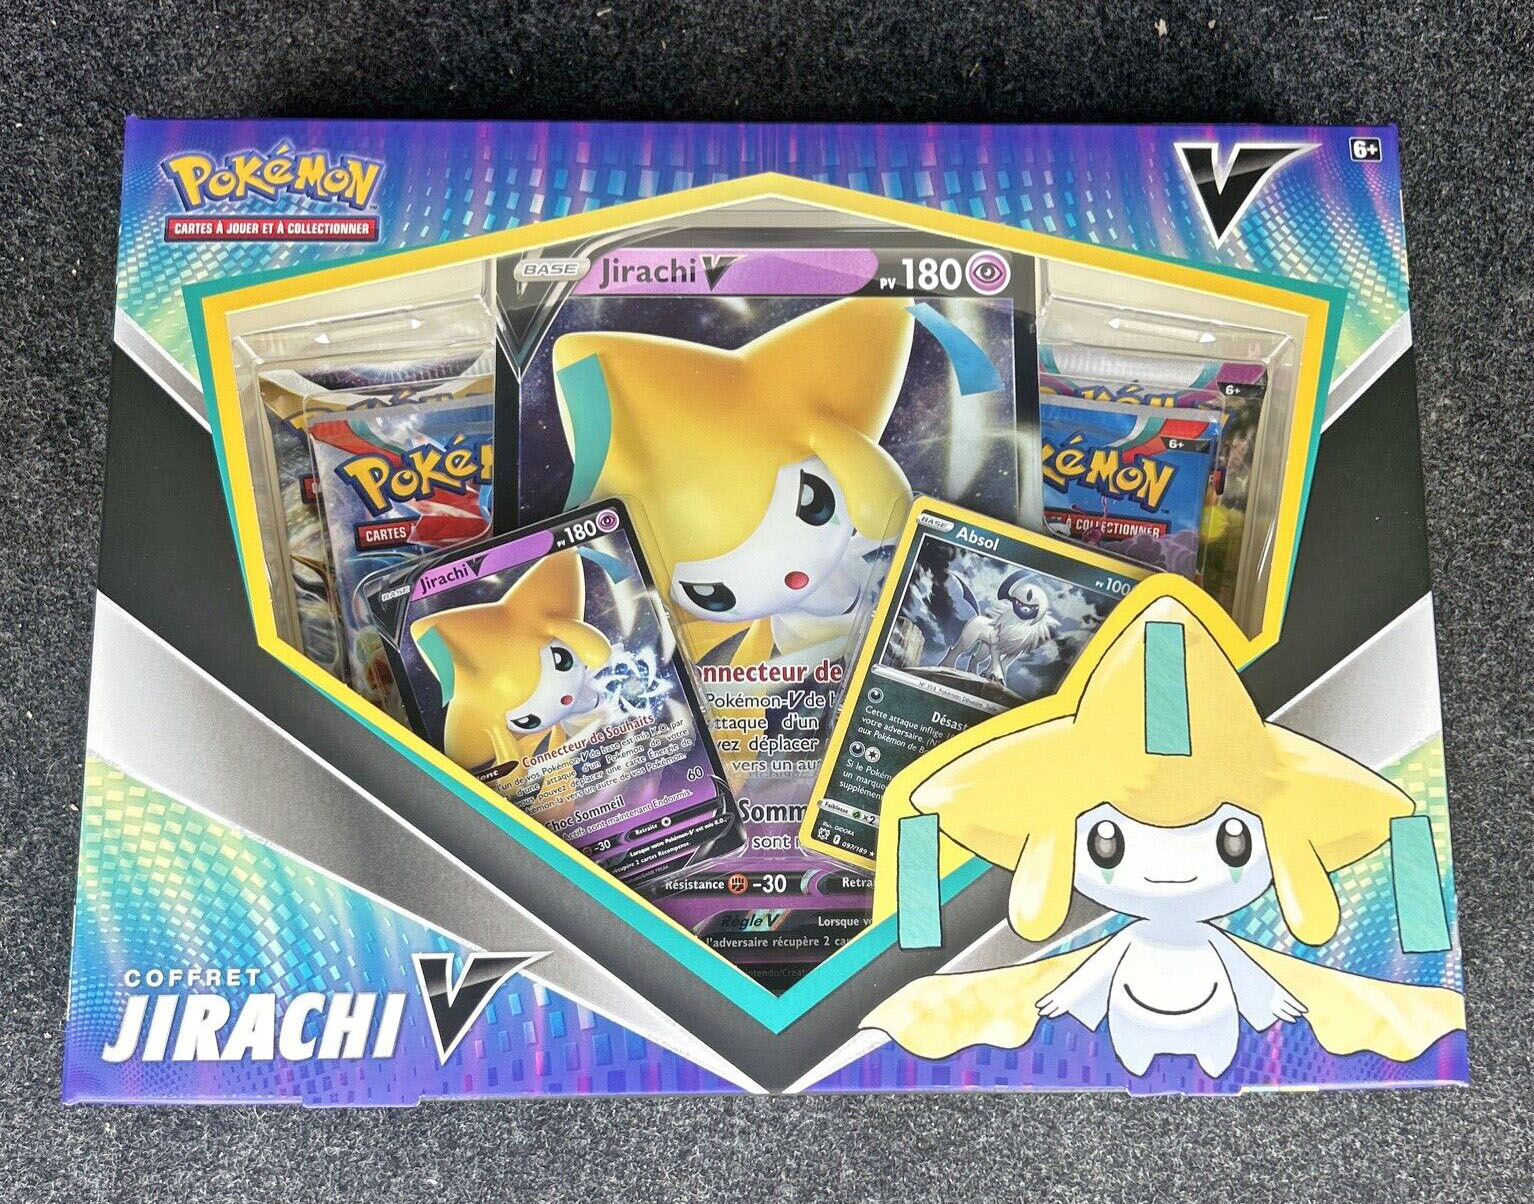 Jirachi V Box: Release Date, Price, UK Pre-Order, Best Deals, What Packs Are Inside And Is It Worth It?